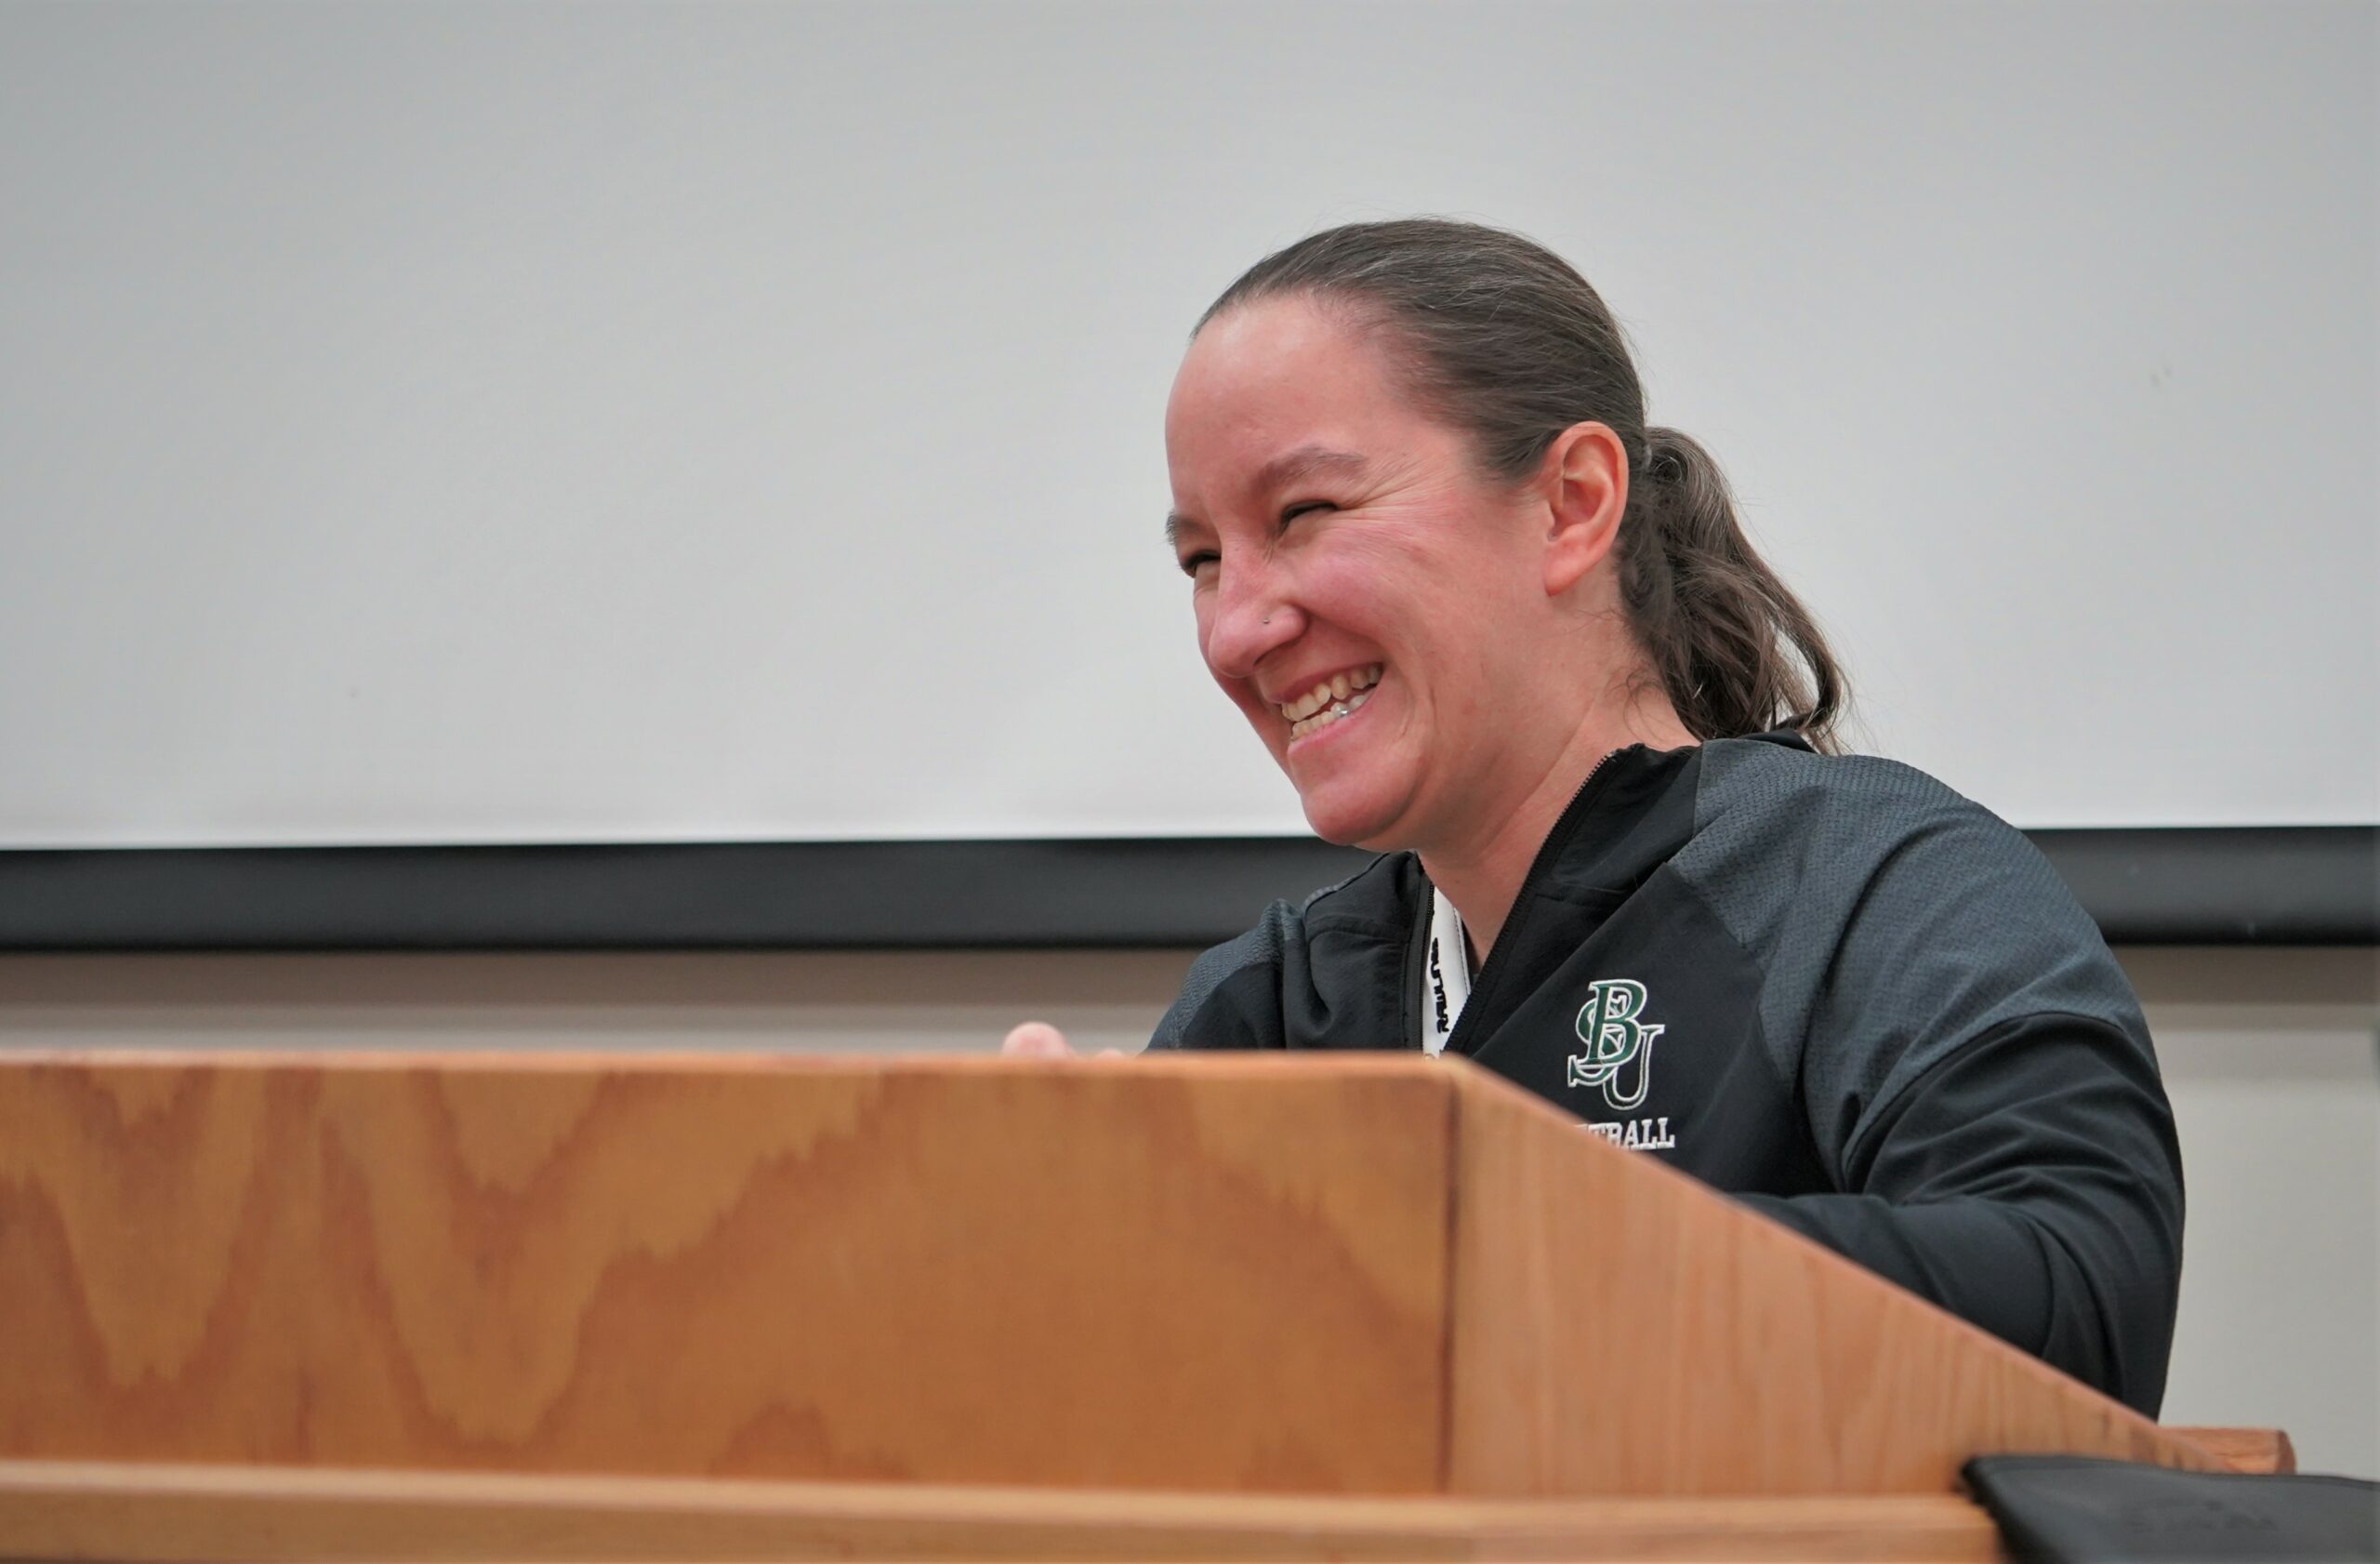 Bemidji State athletic director Britt Lauritsen laughs from the podium while moderating a Title IX speaker panel on Wednesday, Feb. 1, 2023, in the Beaver Pride Room.